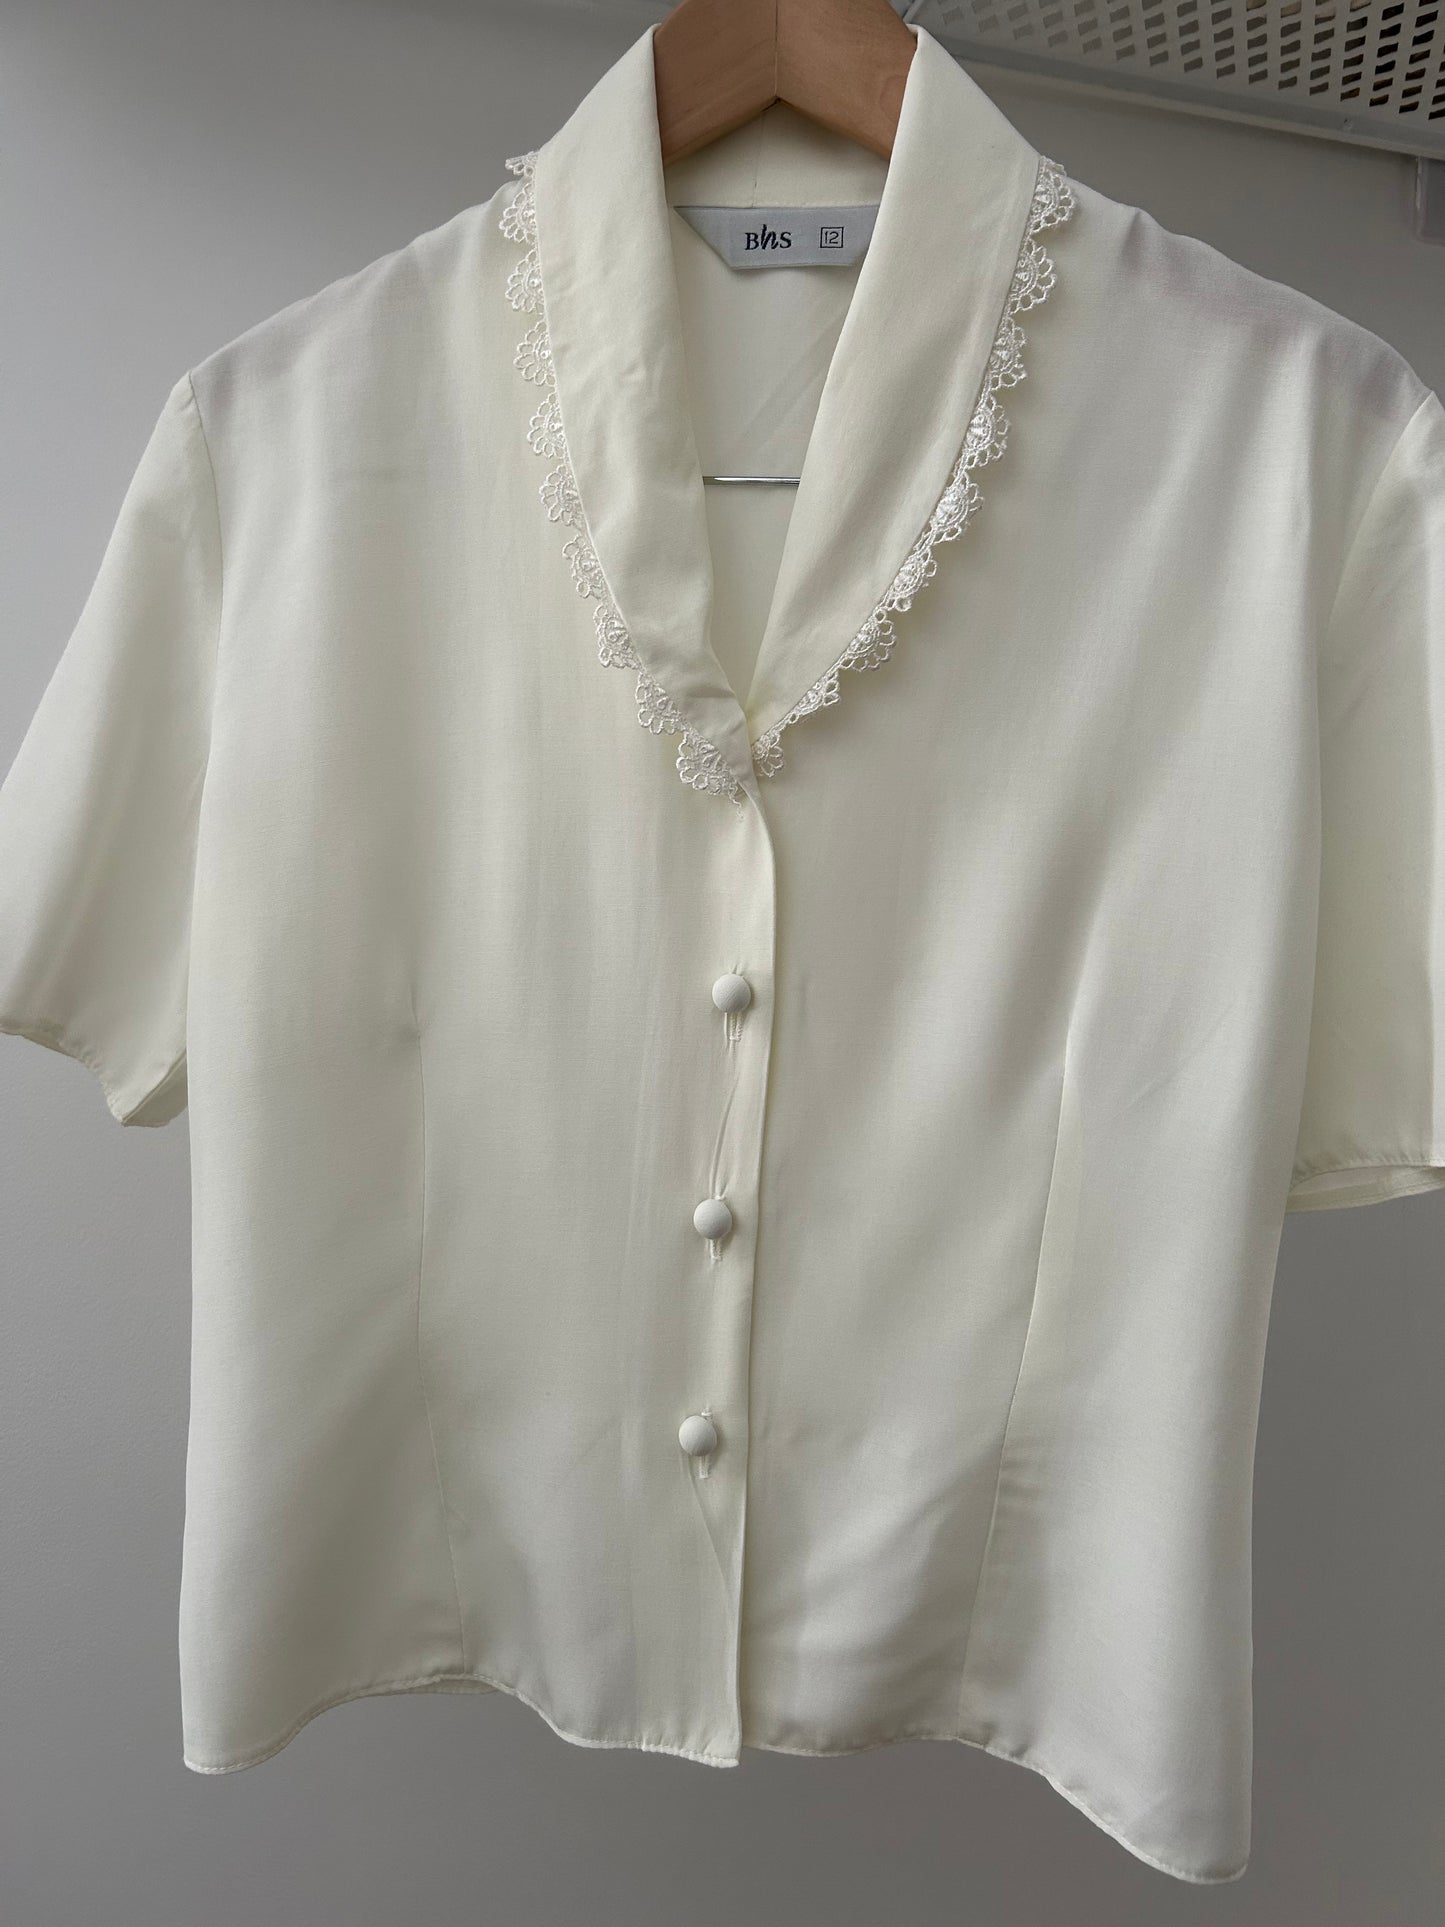 Vintage Late 1980s/1990s BHS UK Size 12 Cream Lace Trim Collared Short Sleeve Blouse